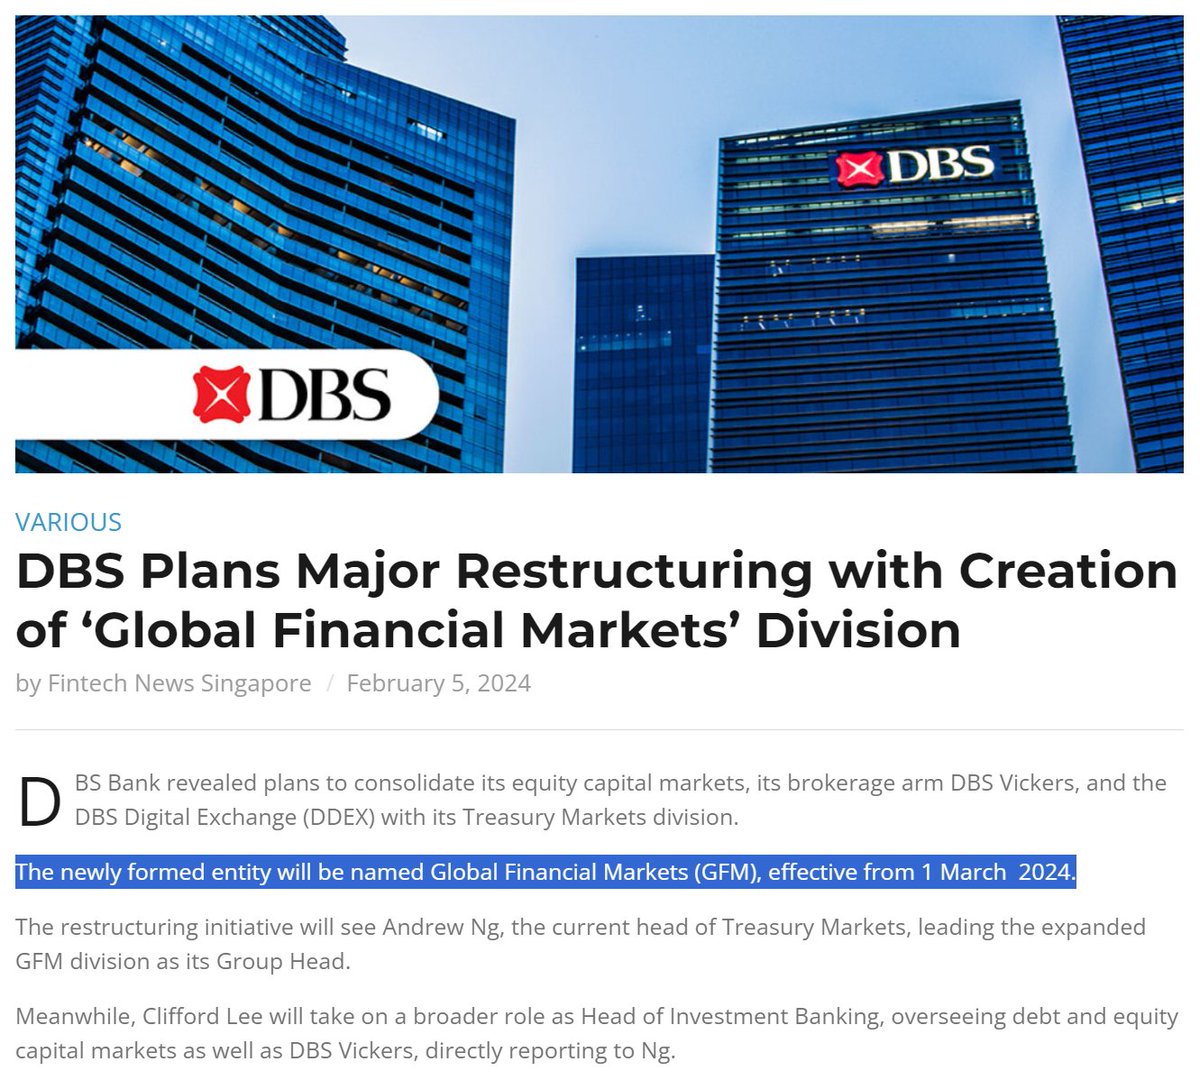 DBS Bank announces major restructuring creating the entity called:  Global Financial Markets (GFM)

Effective March 1st 2024

They are merging their brokerage arm, the Digital Asset Exchange (DDEX) and Treasury division into a single group. #DBS #SBI #HSBC #Metaco #Ripple #XRP